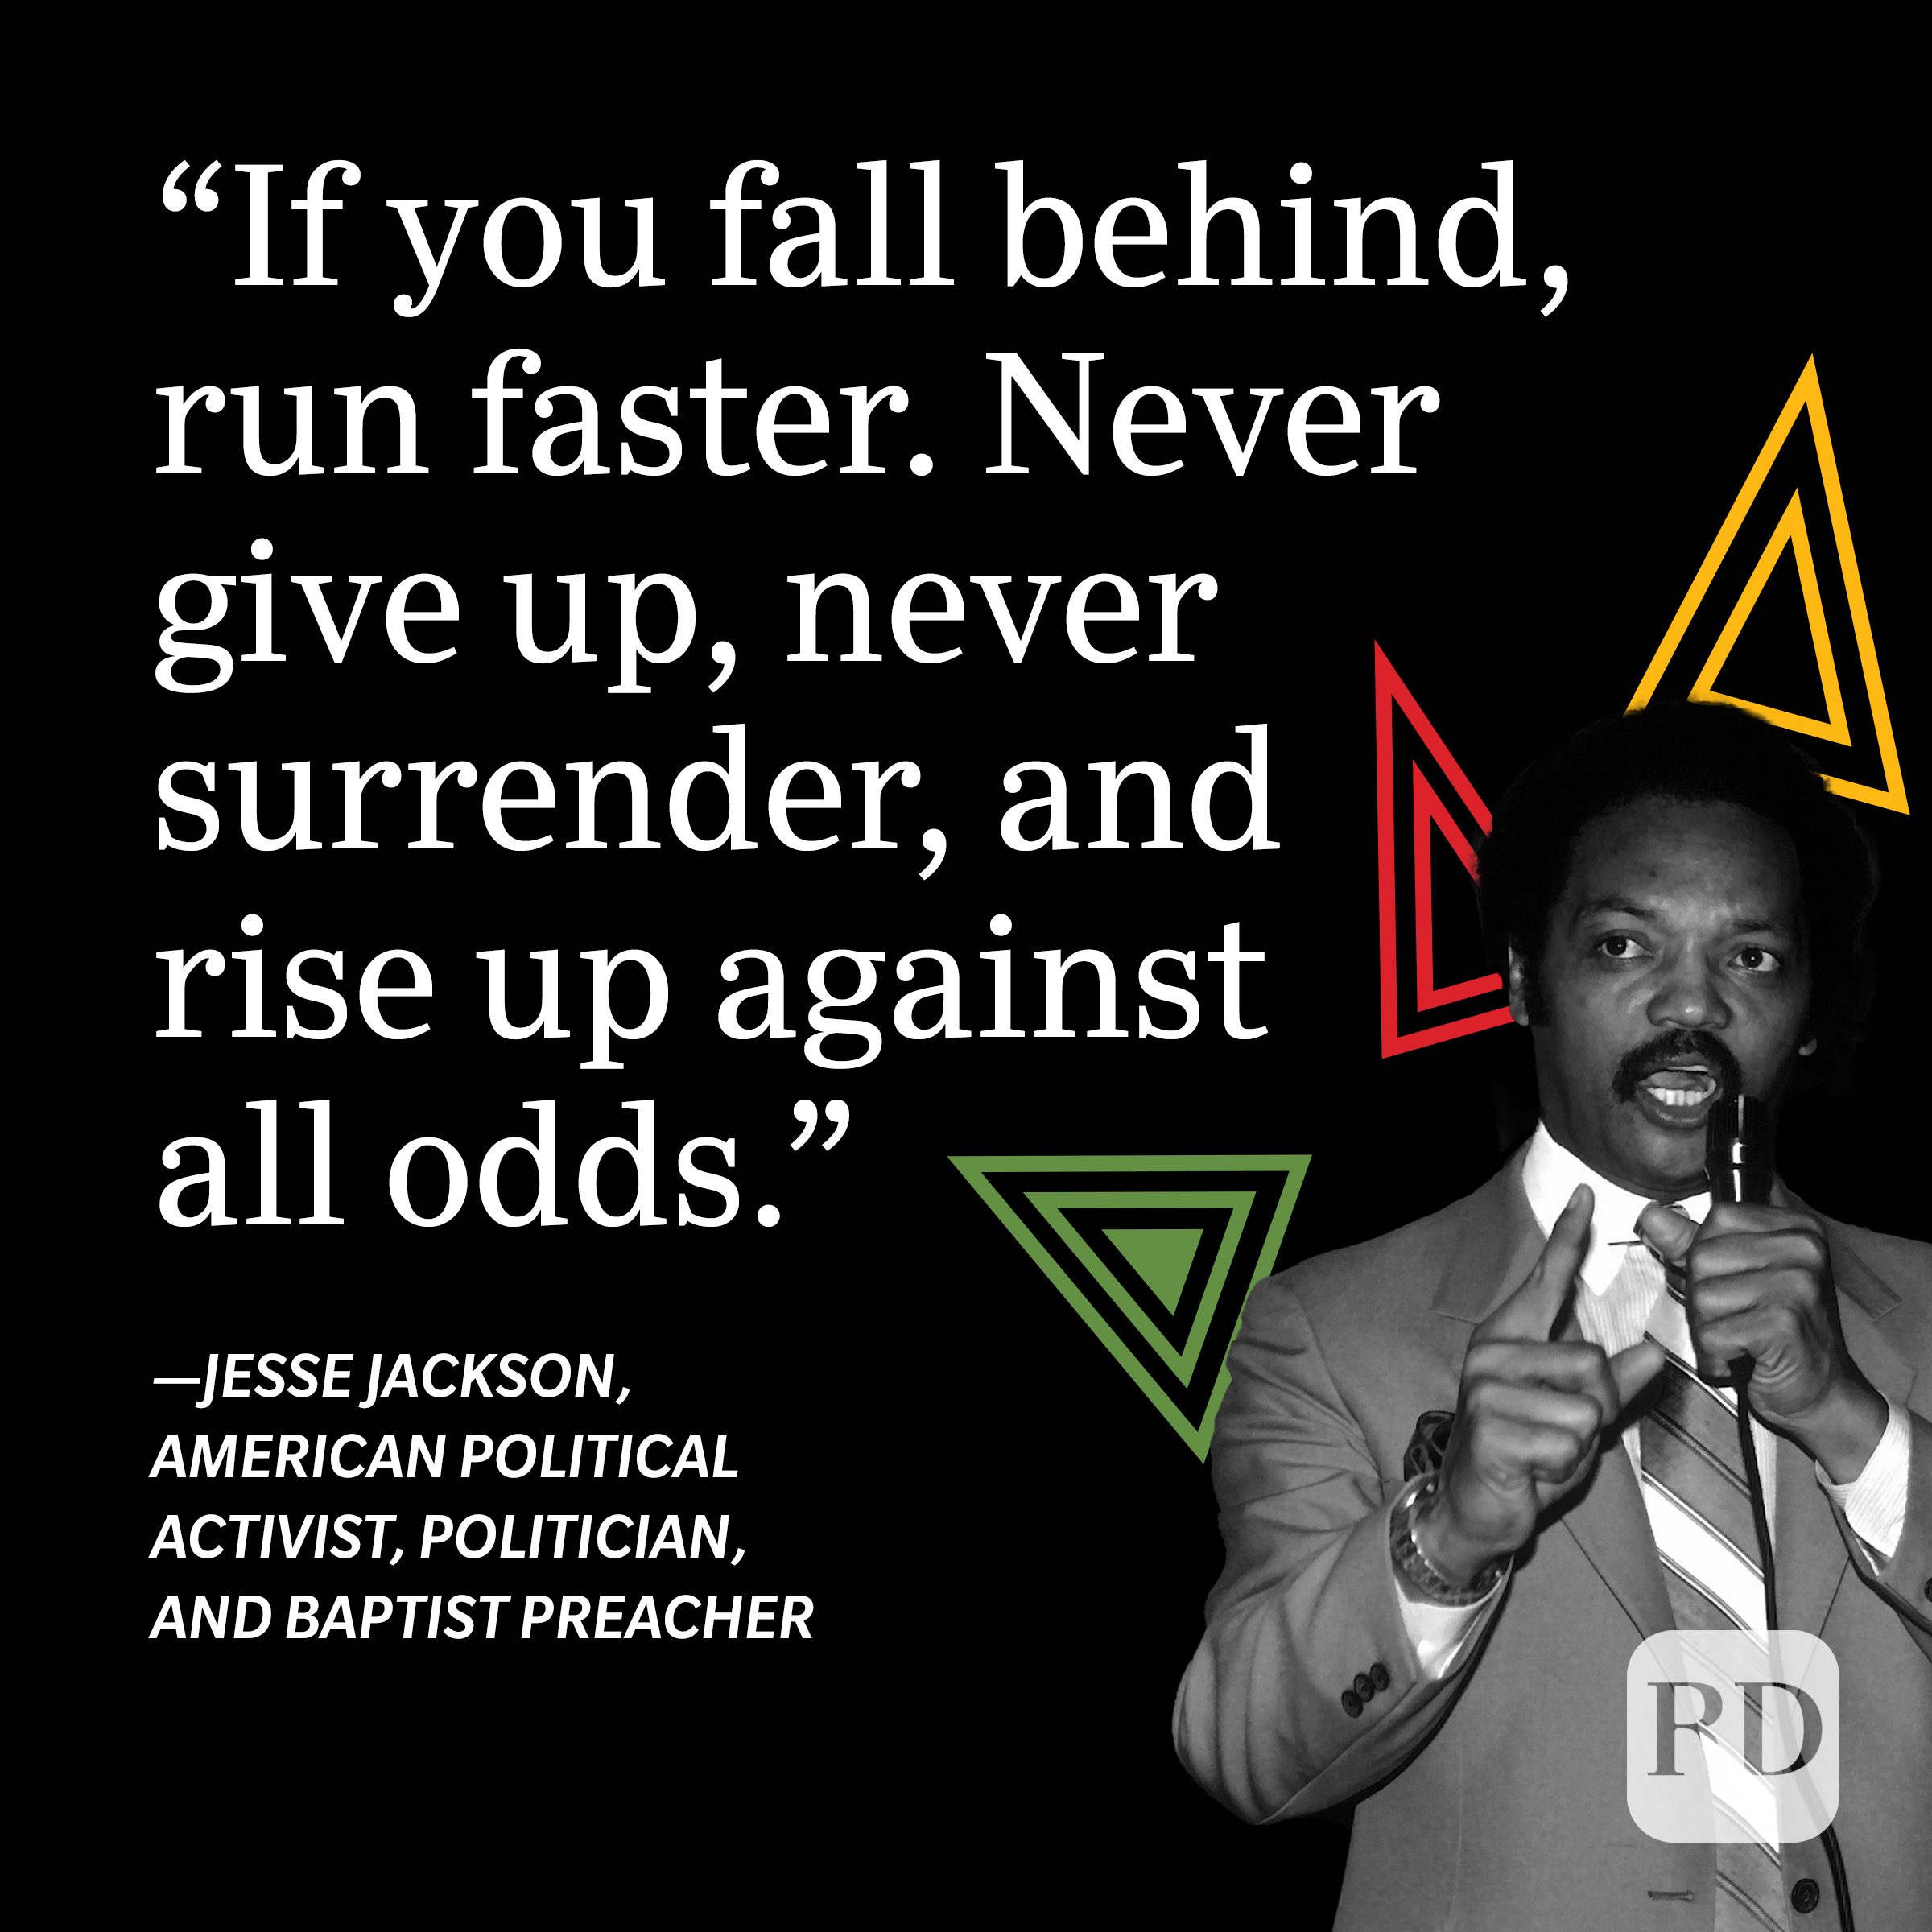 80 Powerful Black History Month Quotes from Leaders and ChangeMakers